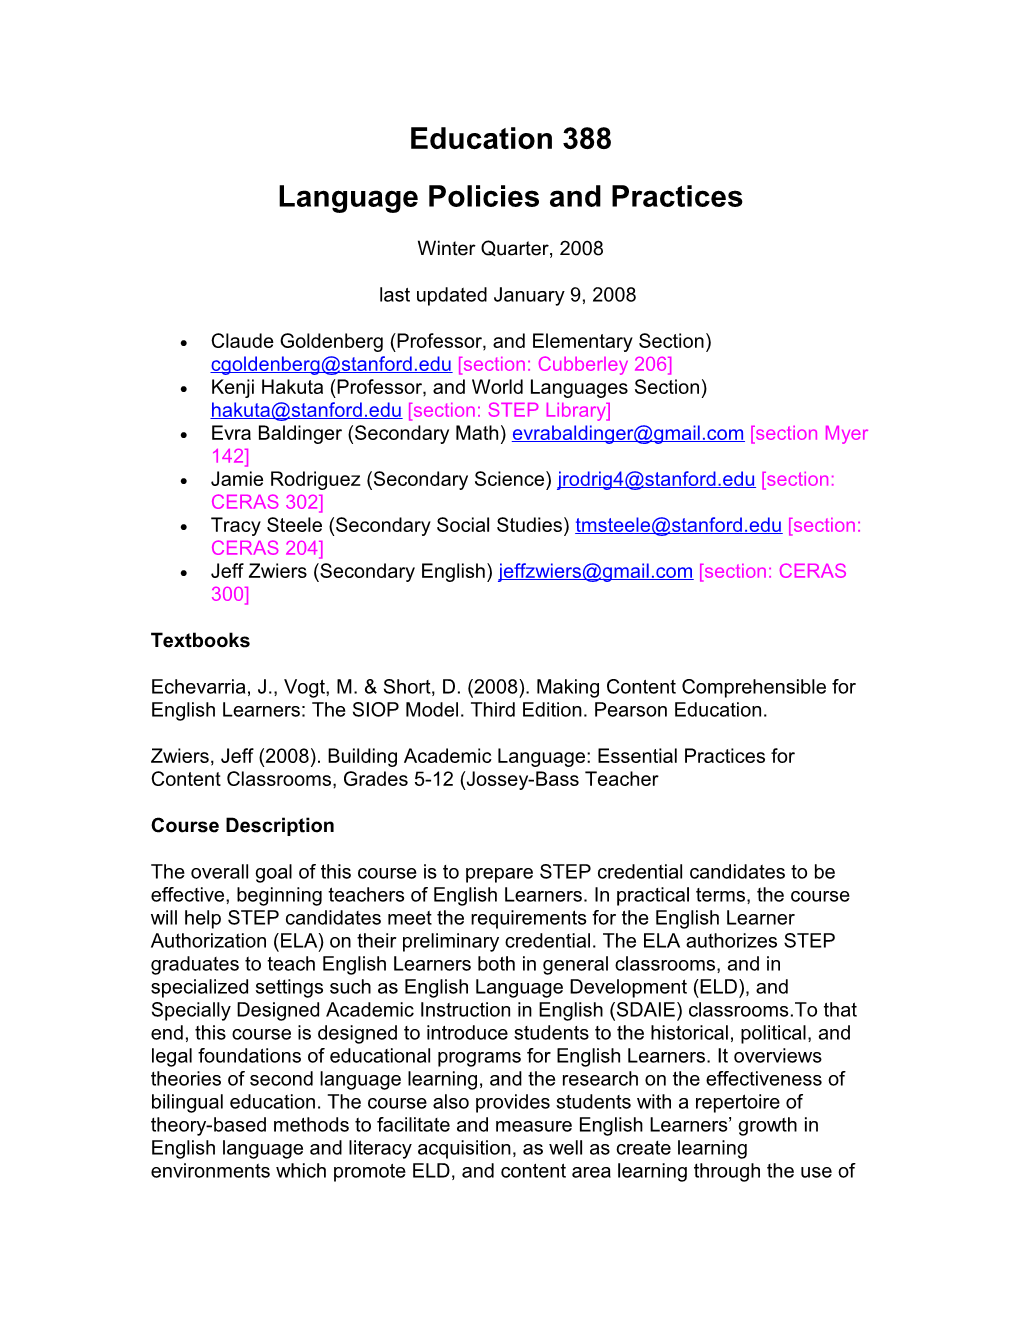 Education 388: Language Policies and Practices (2008)